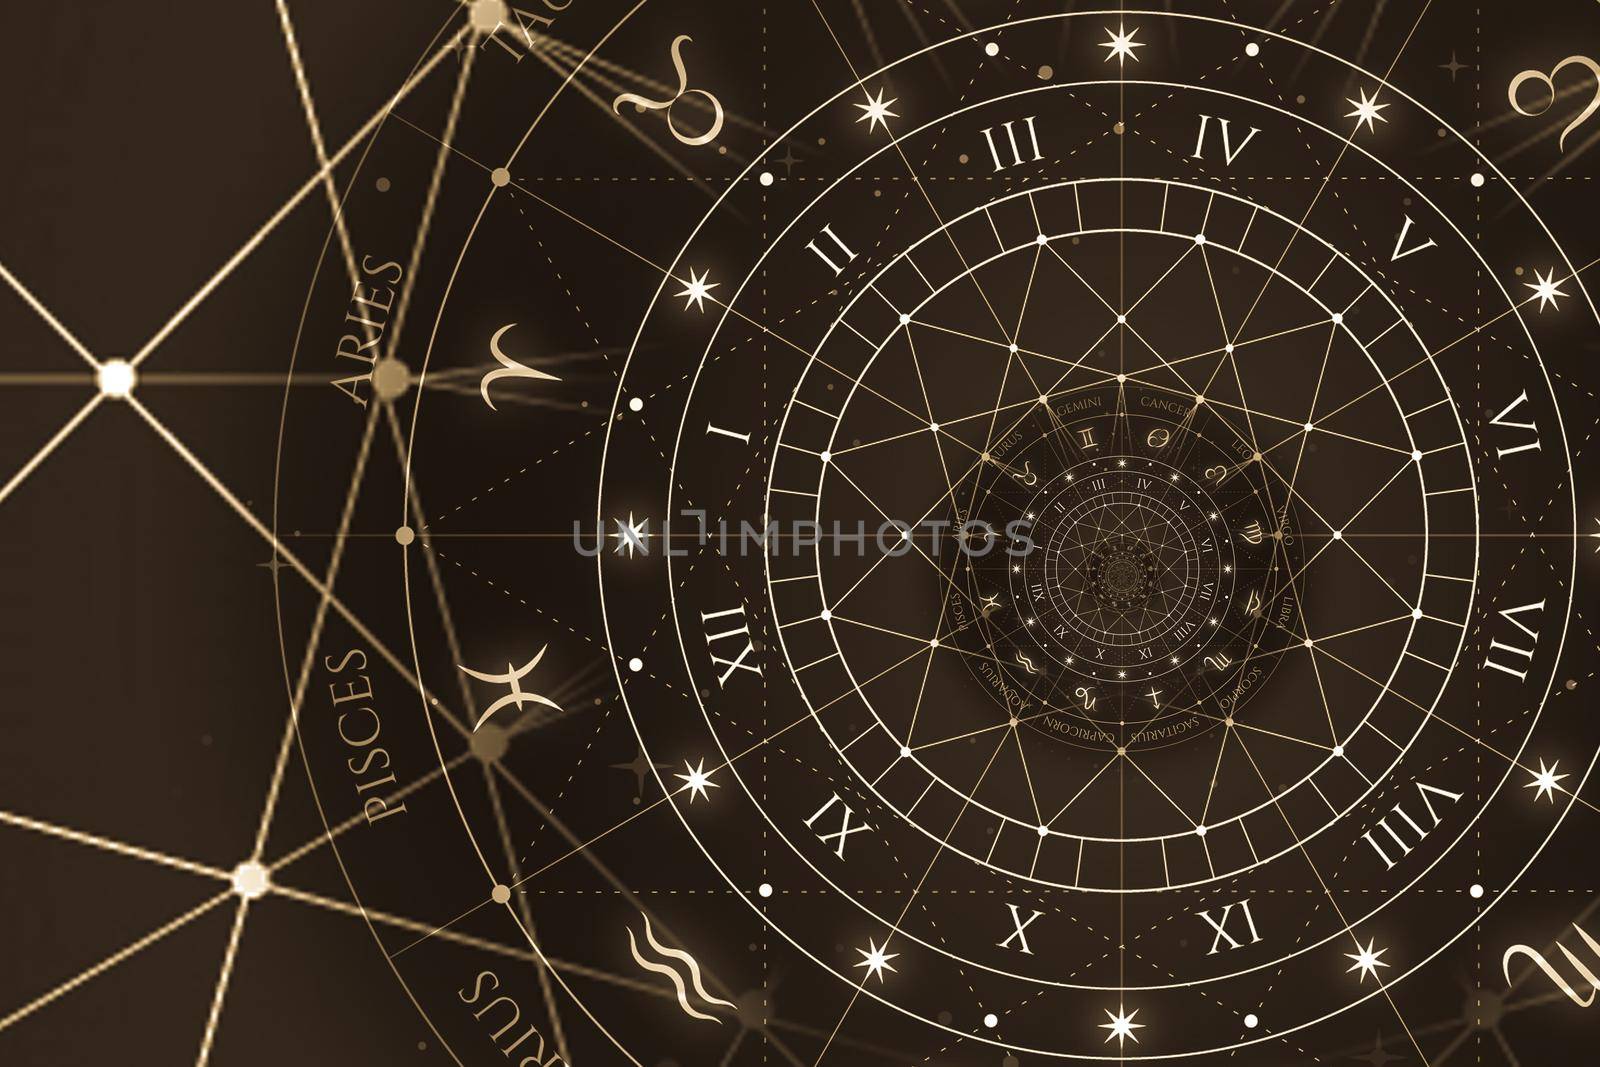 Abstract old conceptual background on mysticism, astrology, fantasy by Perseomedusa